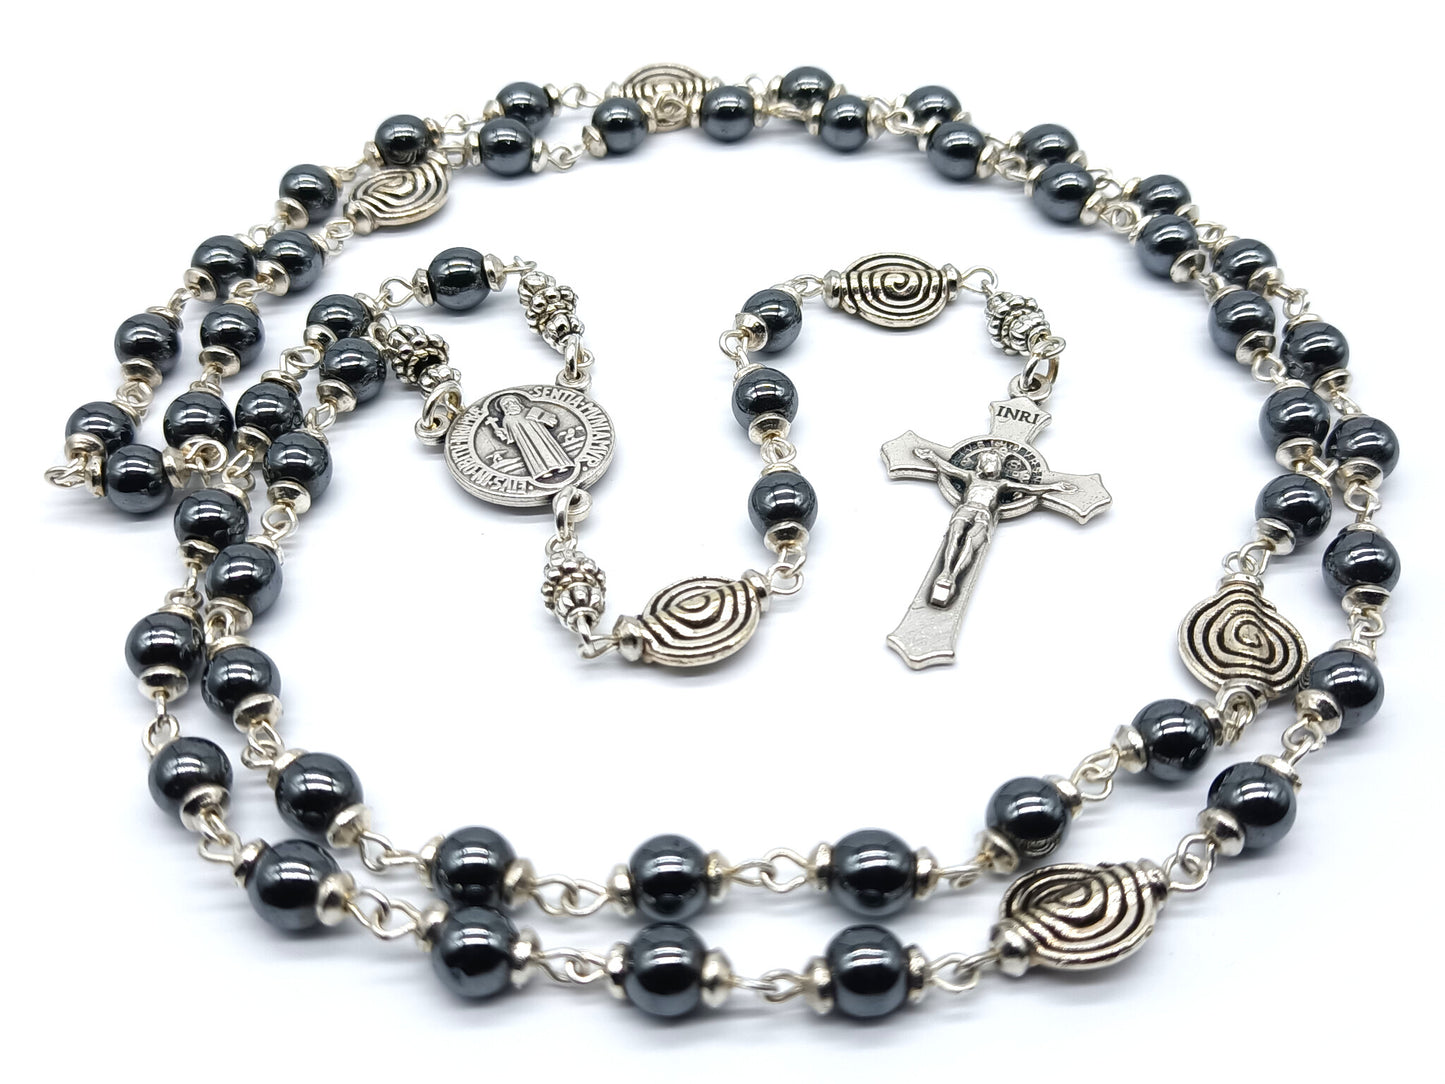 Saint Benedict unique rosary beads with hematite beads, silver St. Benedict crucifix, pater beads and centre medals.